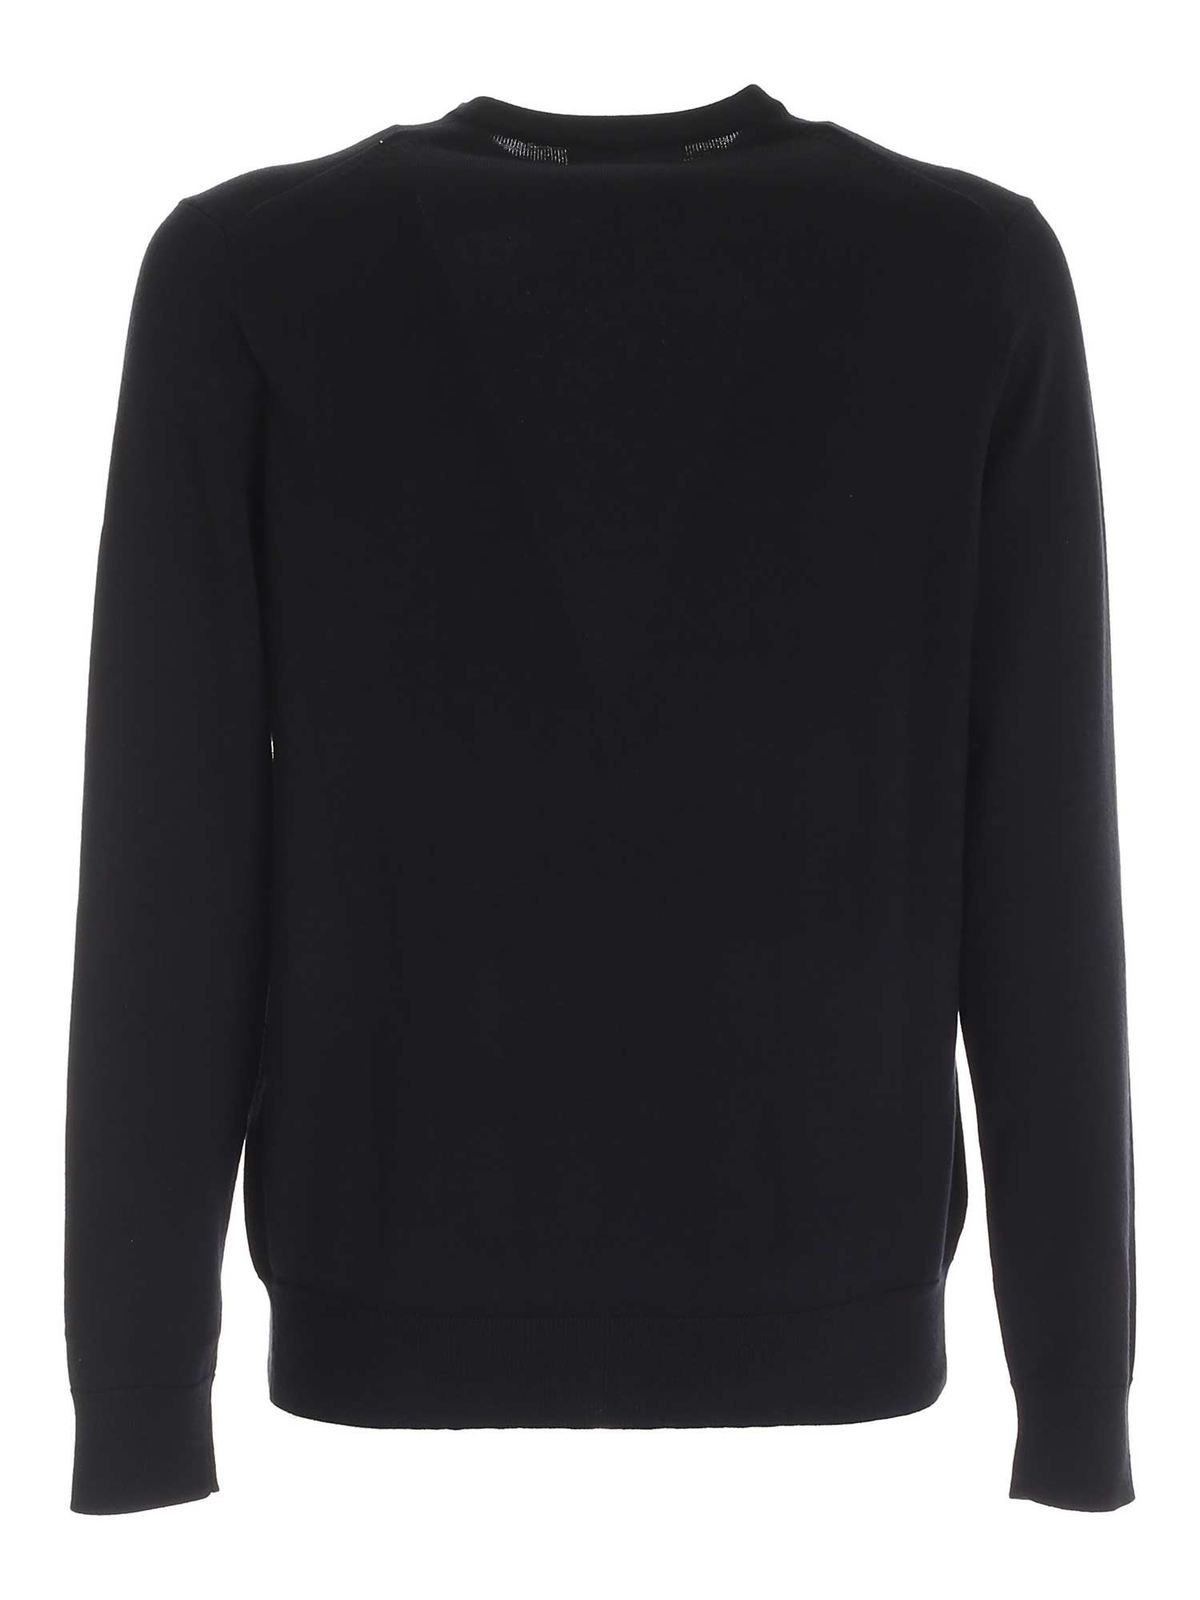 Fred Perry - Classic pullover in black - crew necks - K9601102 | iKRIX.com